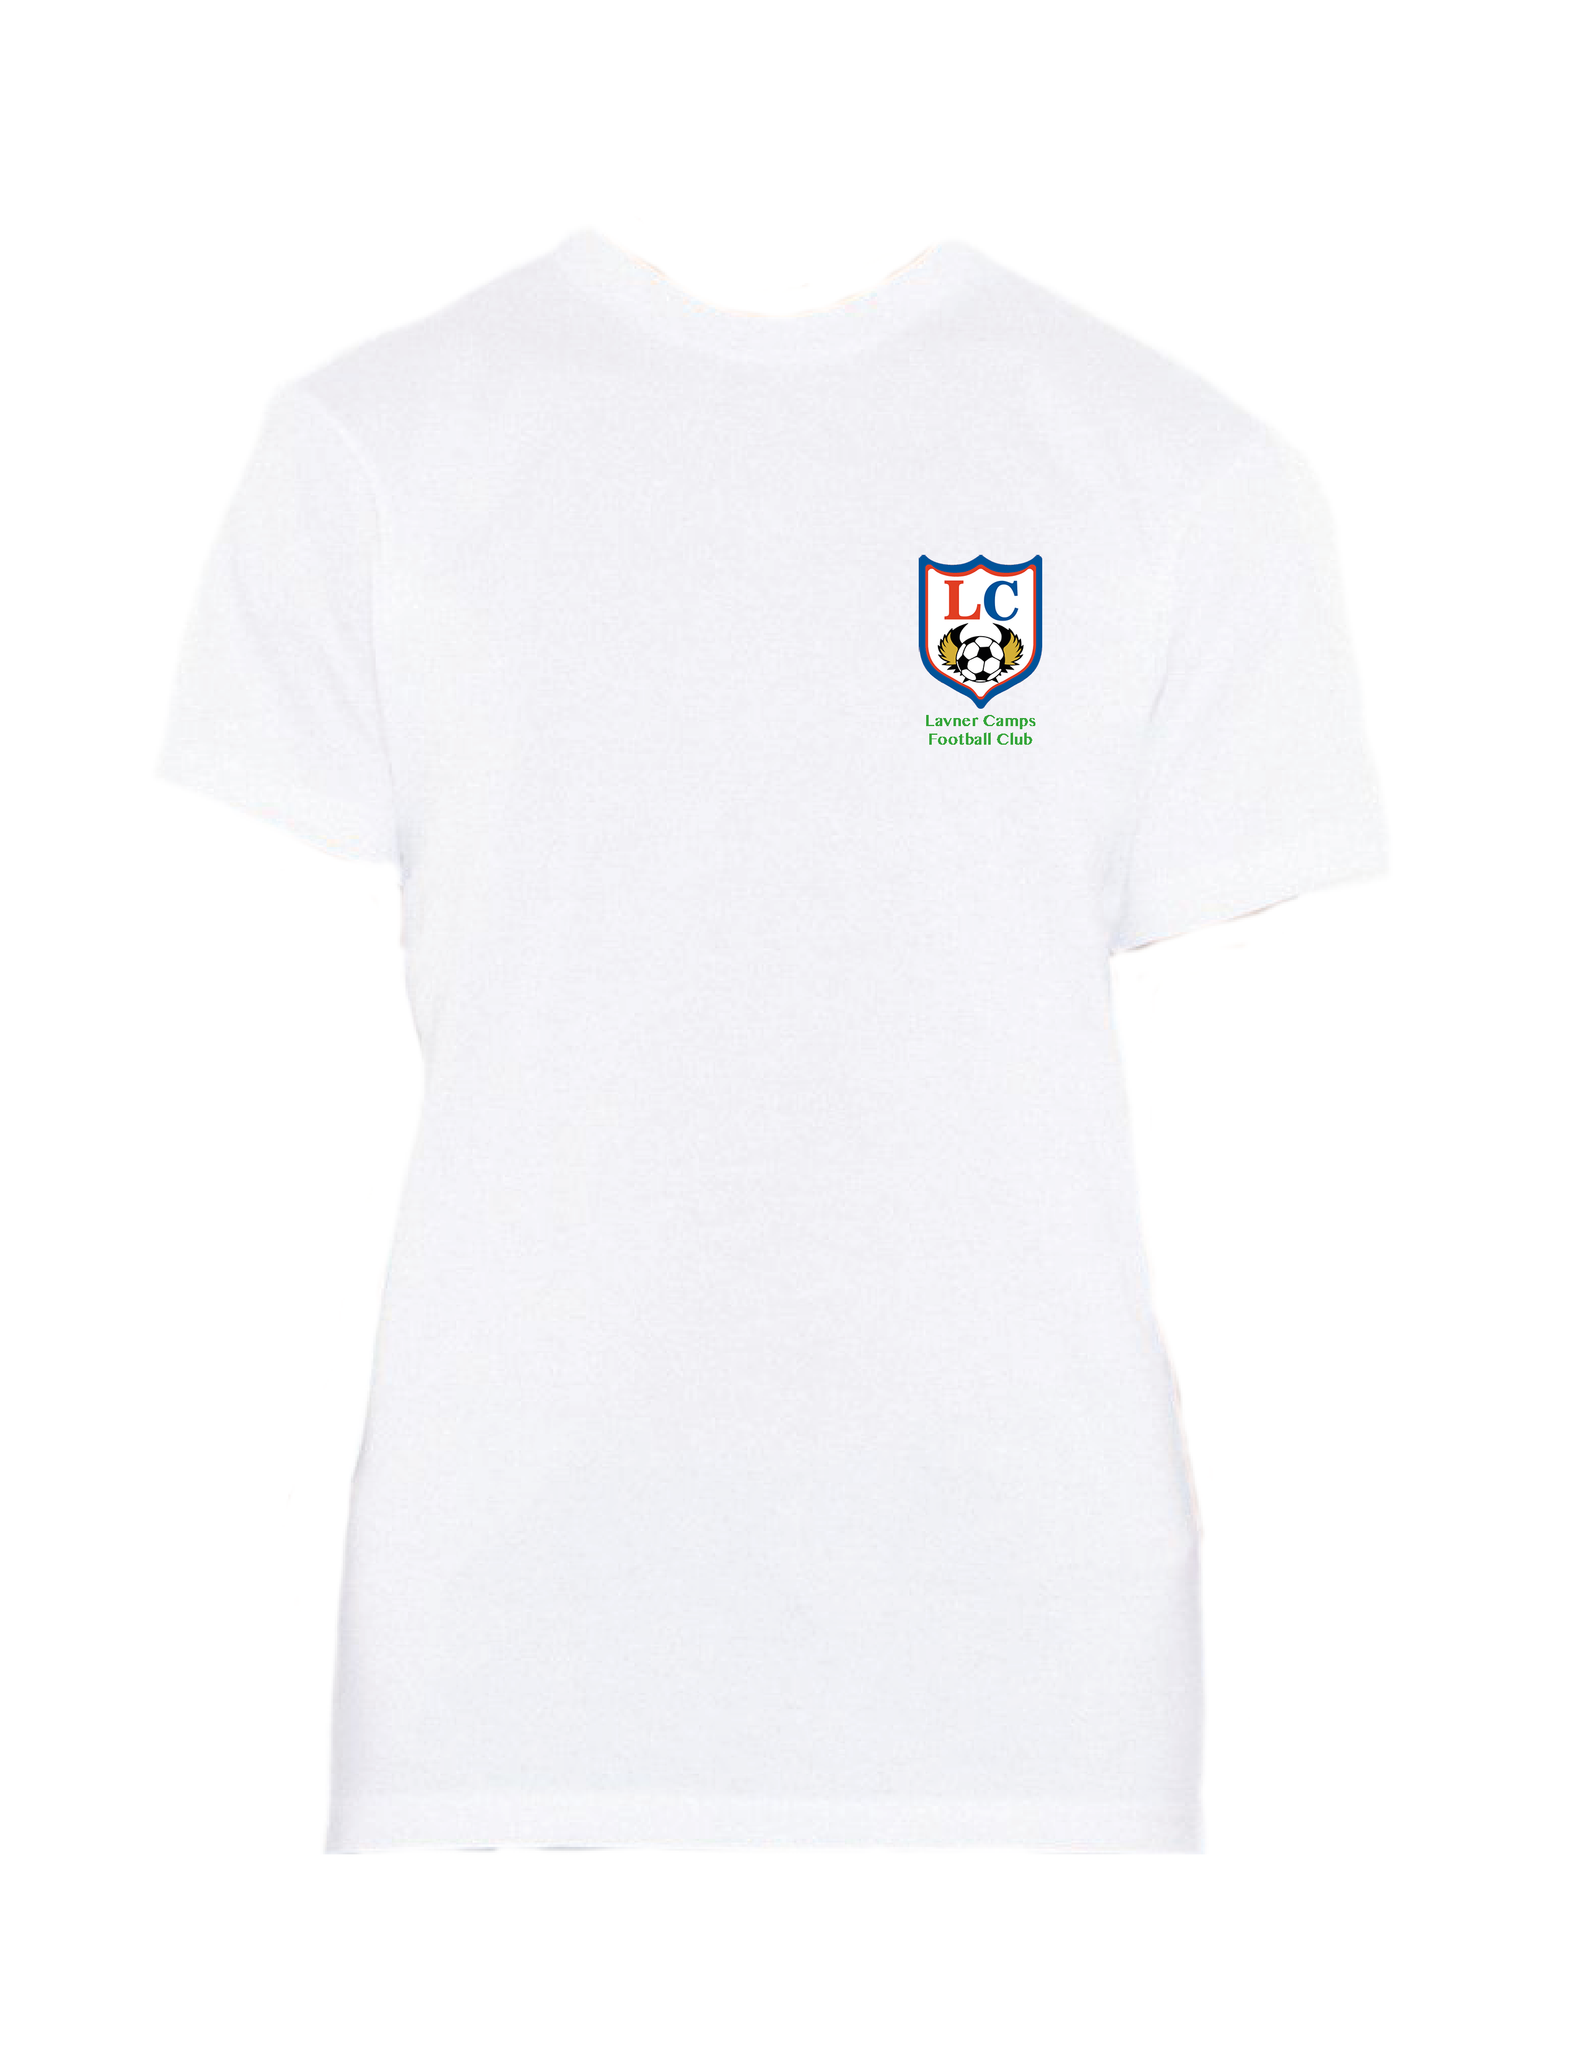 Lavner Camps Football Club T-Shirt (Youth)